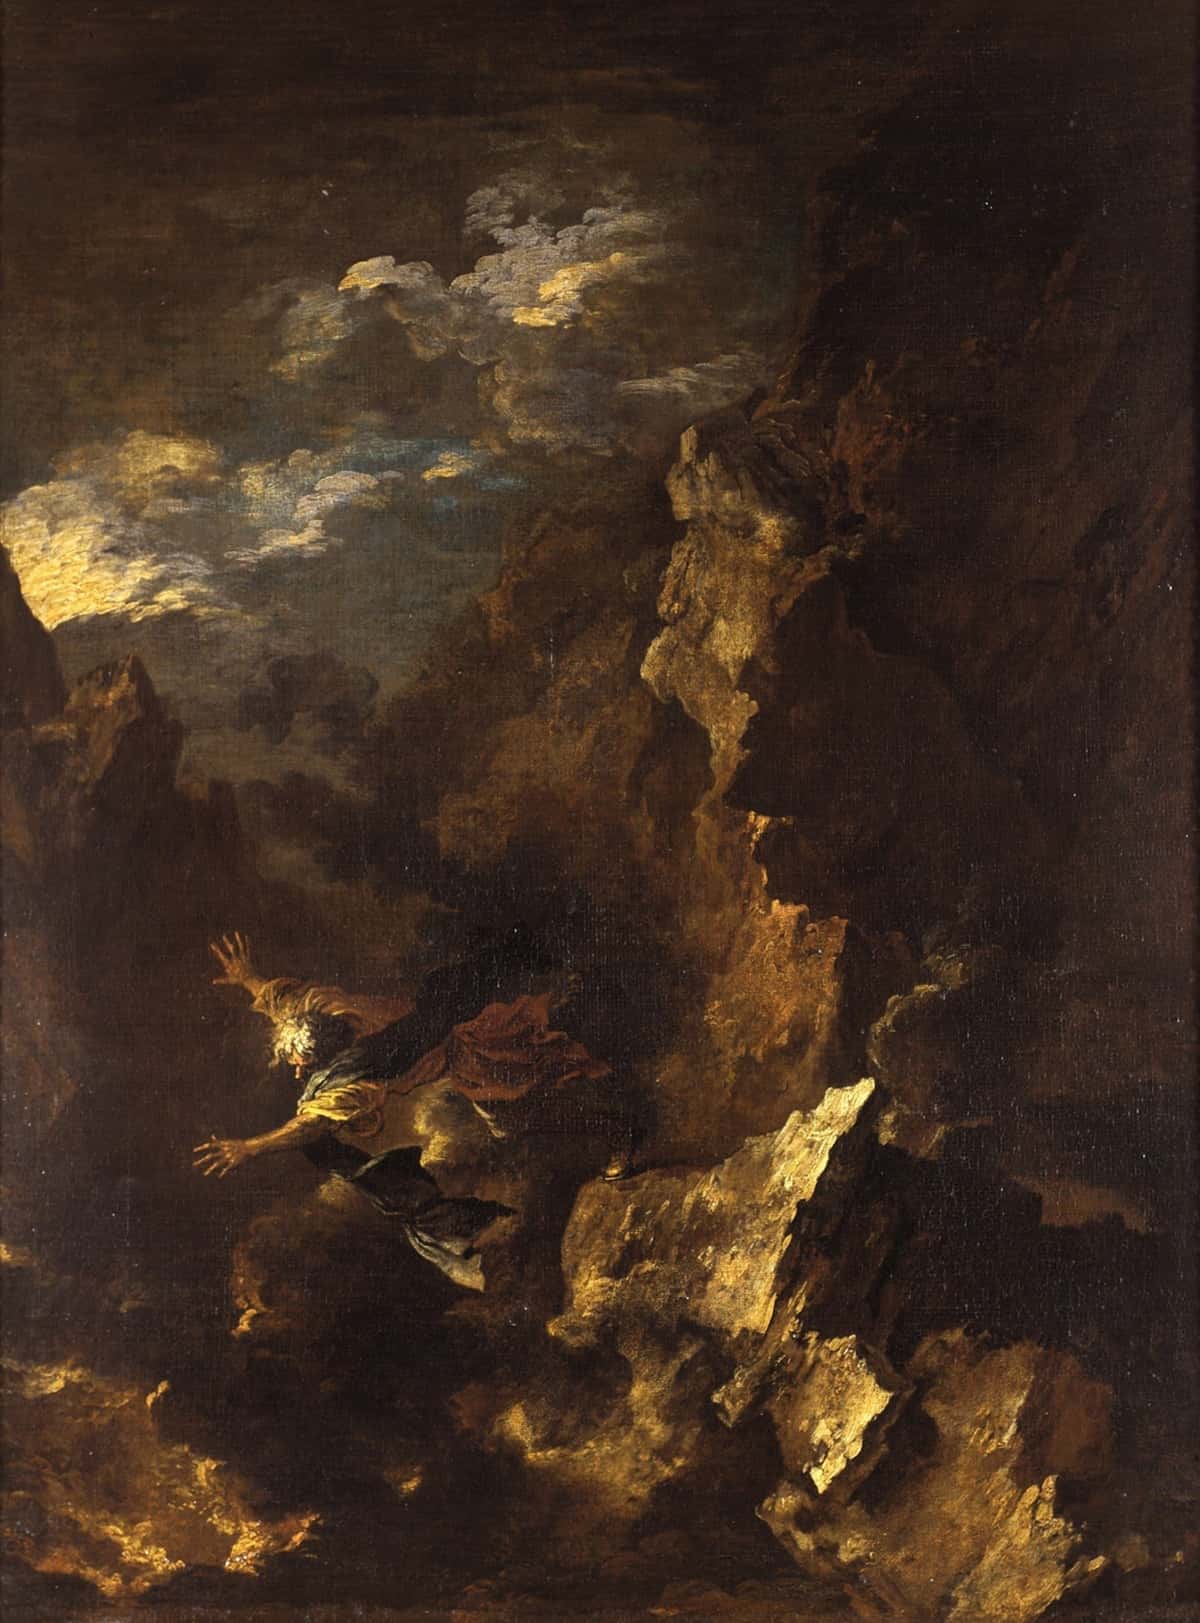 Art depicting Empedocles' death in the Sicilian volcano.